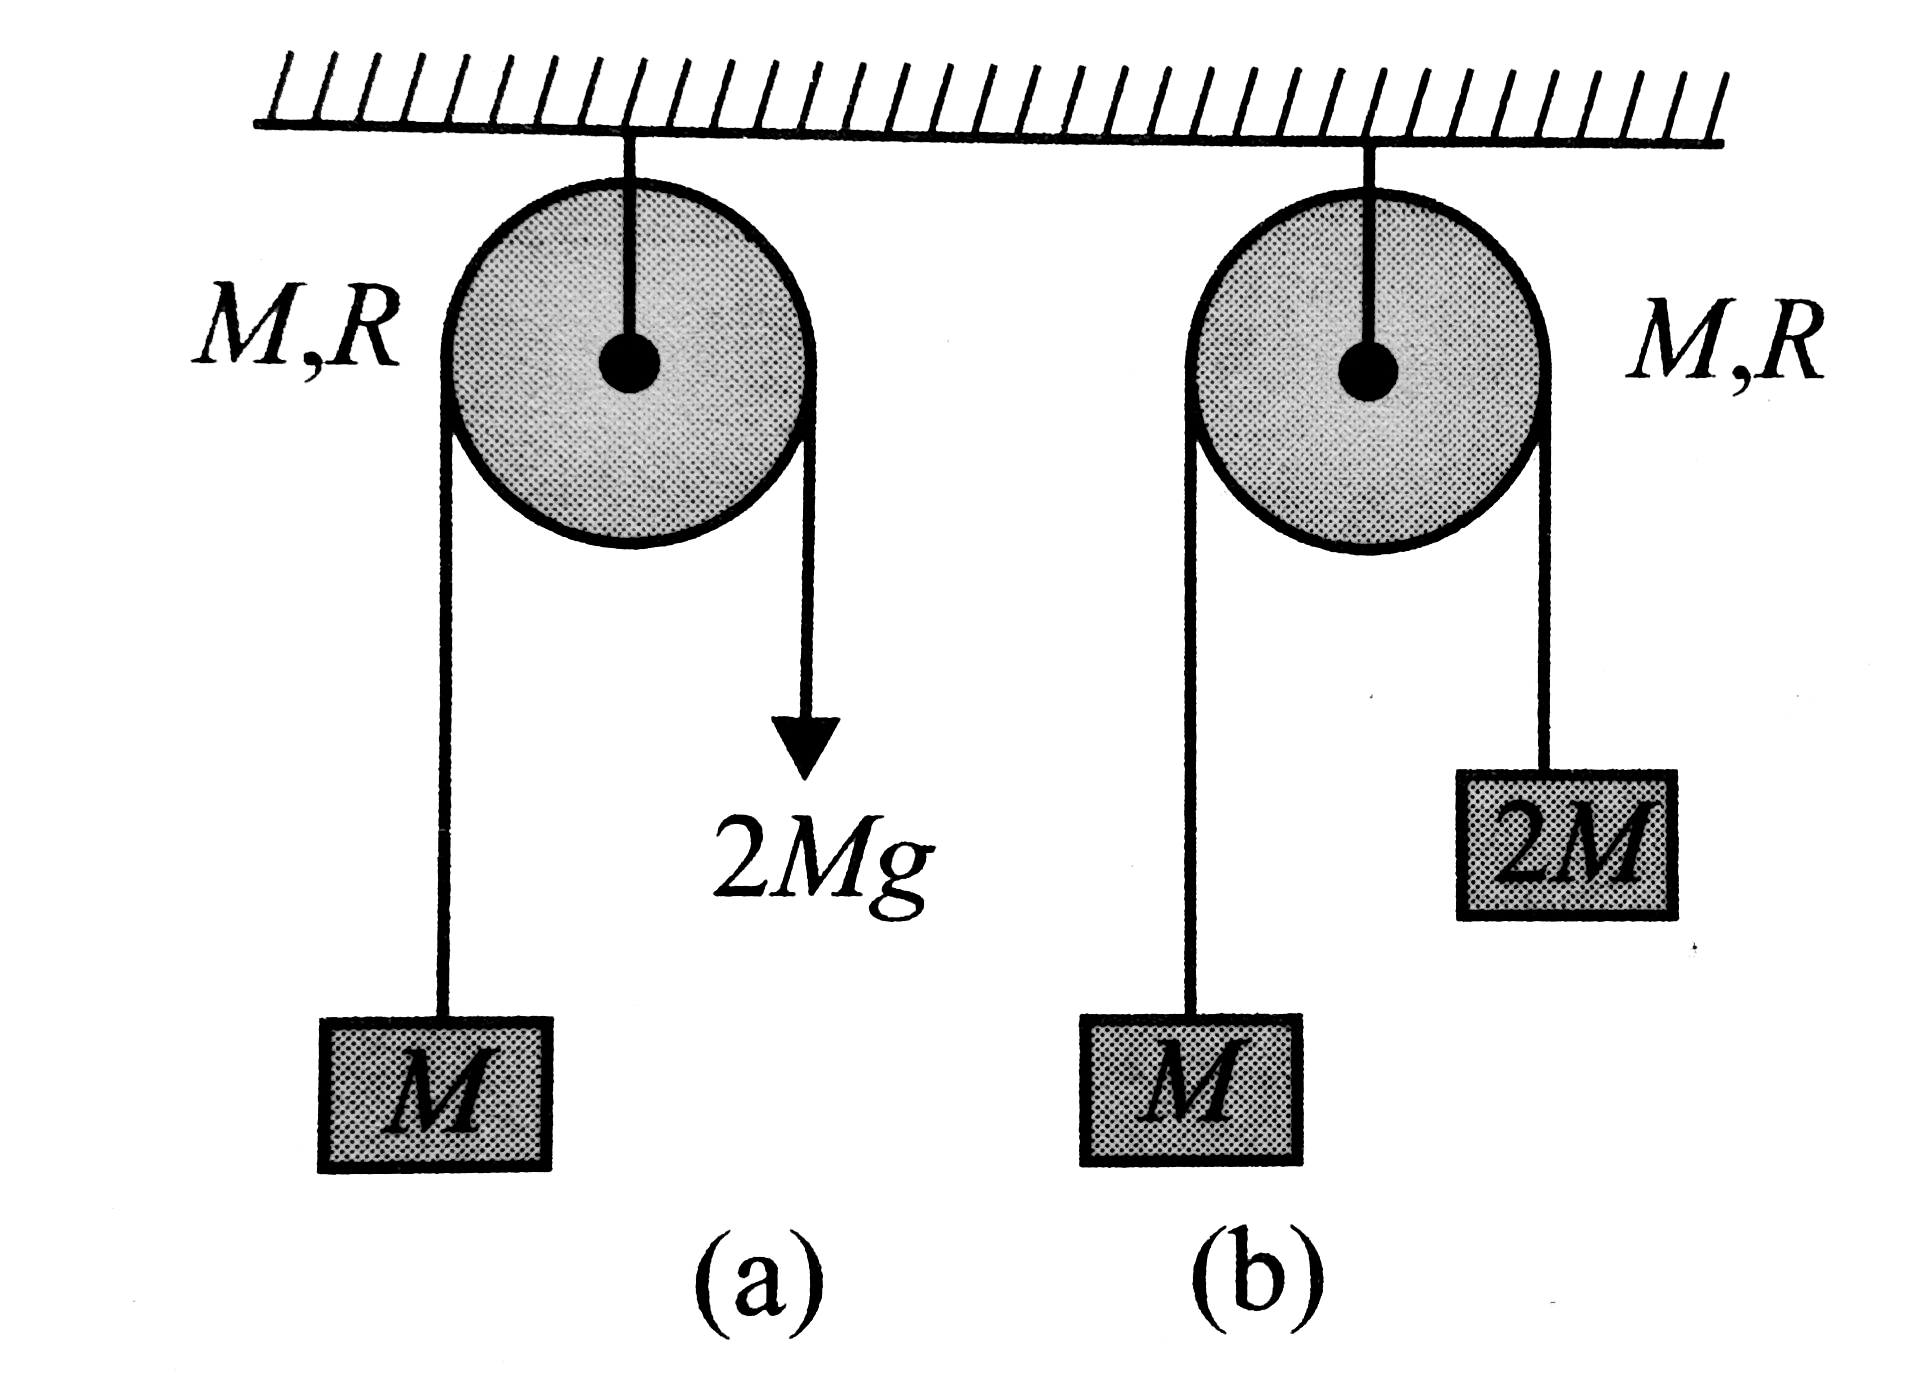 A cord is wrapped on a pulley (disk) of mass M and radius R as shown in Fig. To one end of the cord, a block of mass M is connected us shown and to other end in (a) a force of 2 Mg and in (b) a block of mass 2M. Let angular acceleration of the disk in A and B is alpha(A) and alpha(B), respectively, then (cord is not slipping on the pulley).